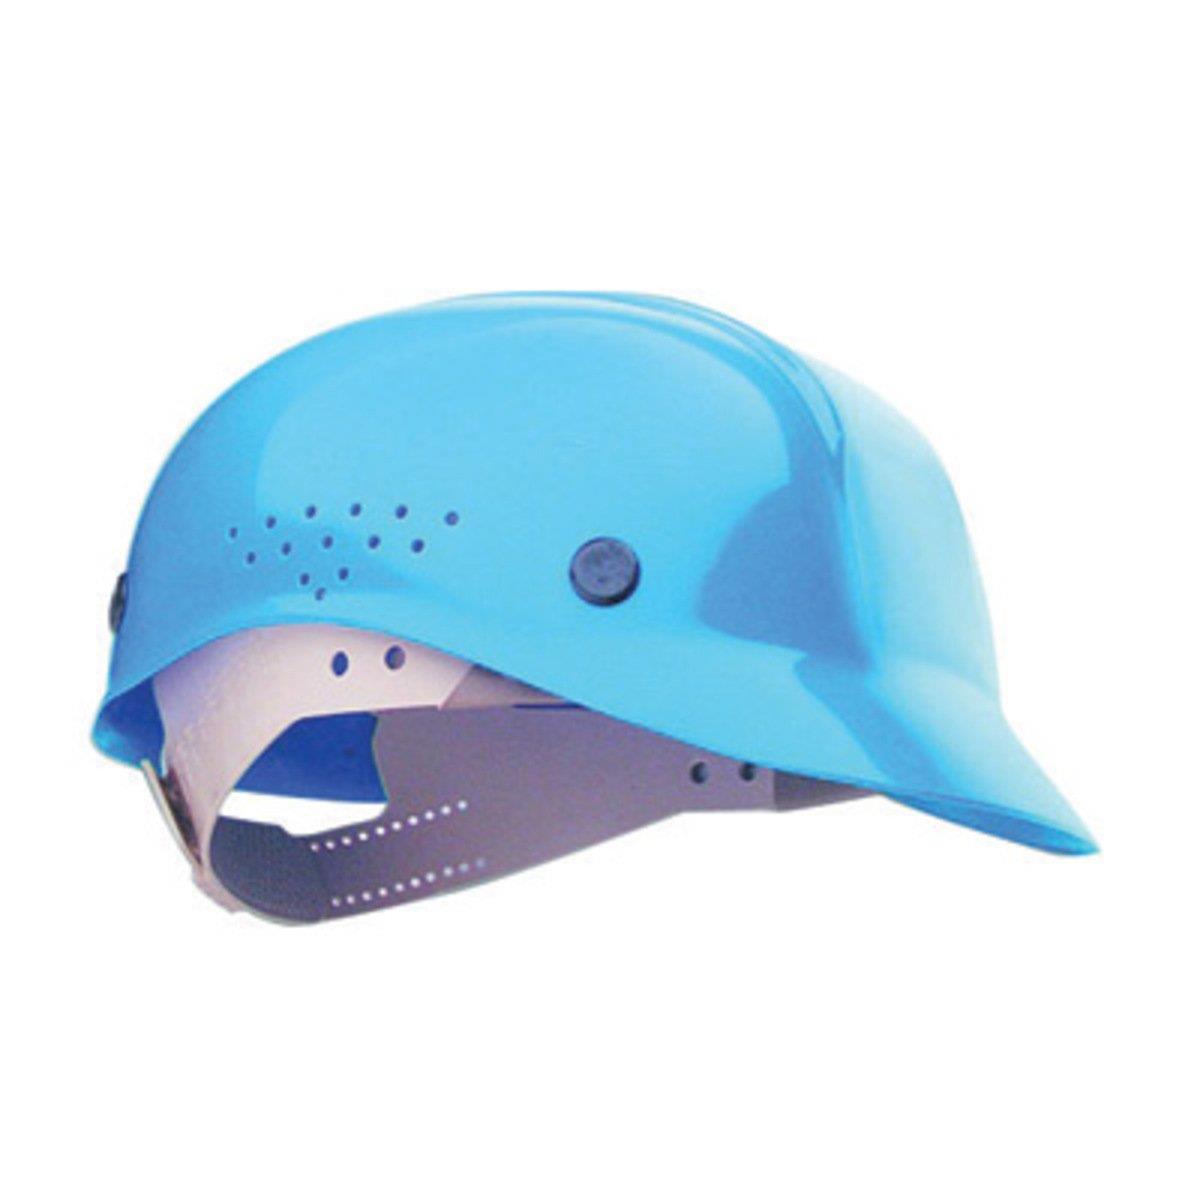 North Safety Bump Cap with No Foam Insert